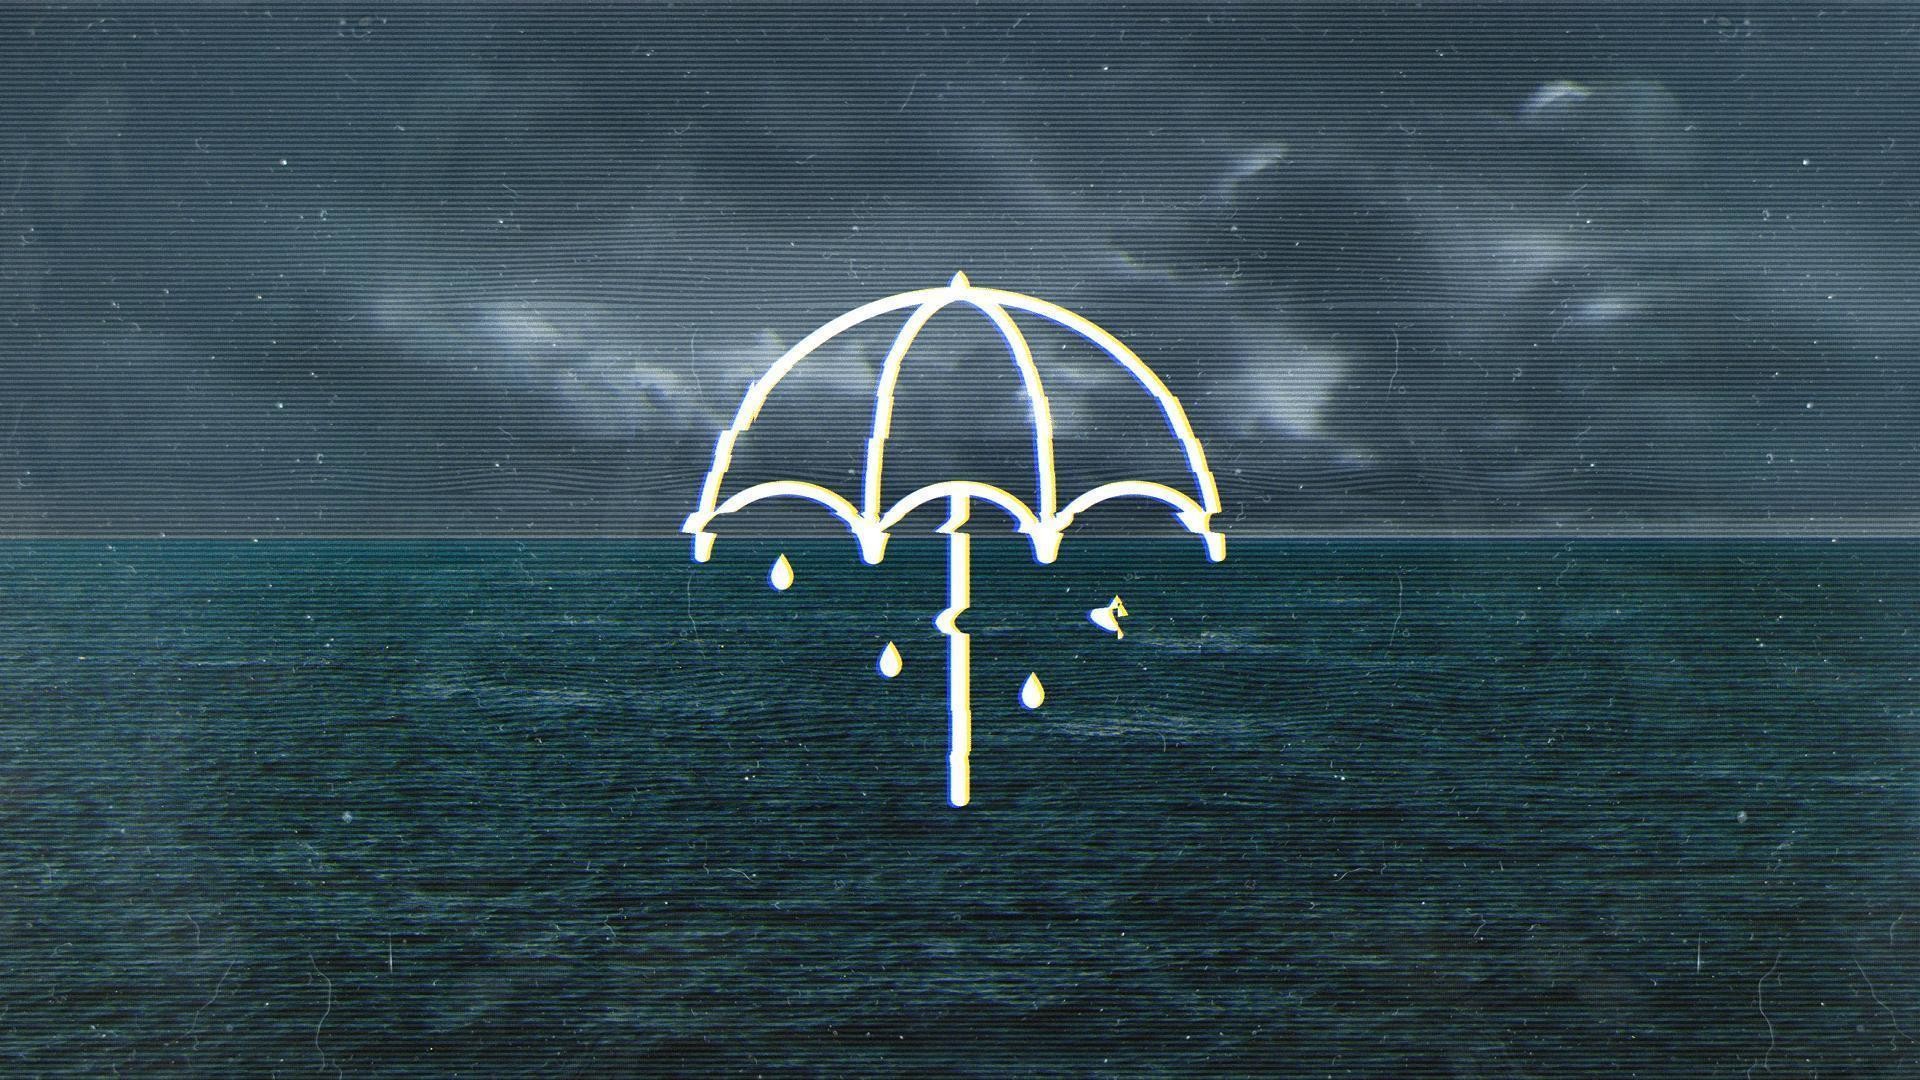 1920x1080 Just made a quick wallpaper with the umbrella logo. I'll be taking .